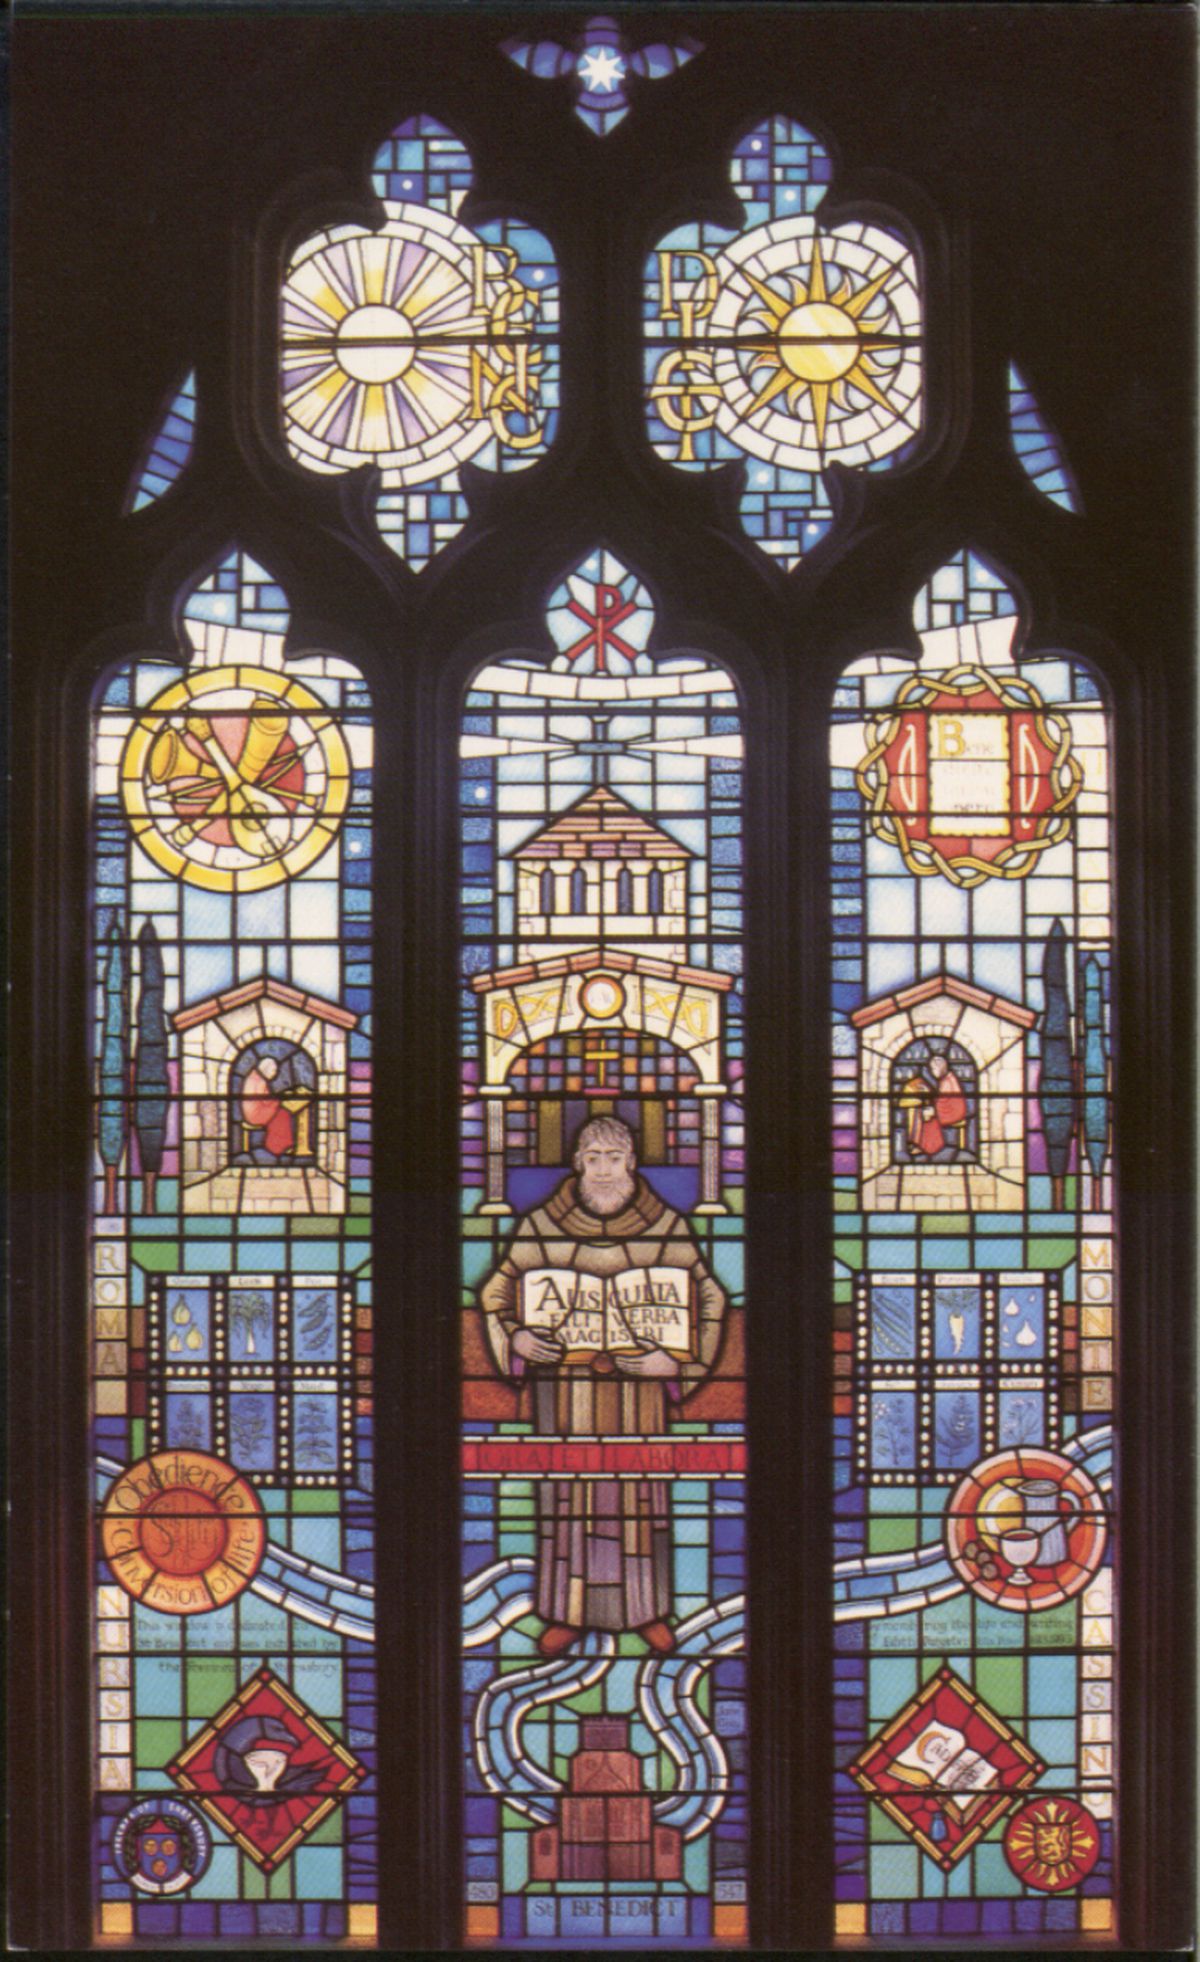 The St Benedict window at Shrewsbury Abbey also acts a memorial to the Cadfael writer